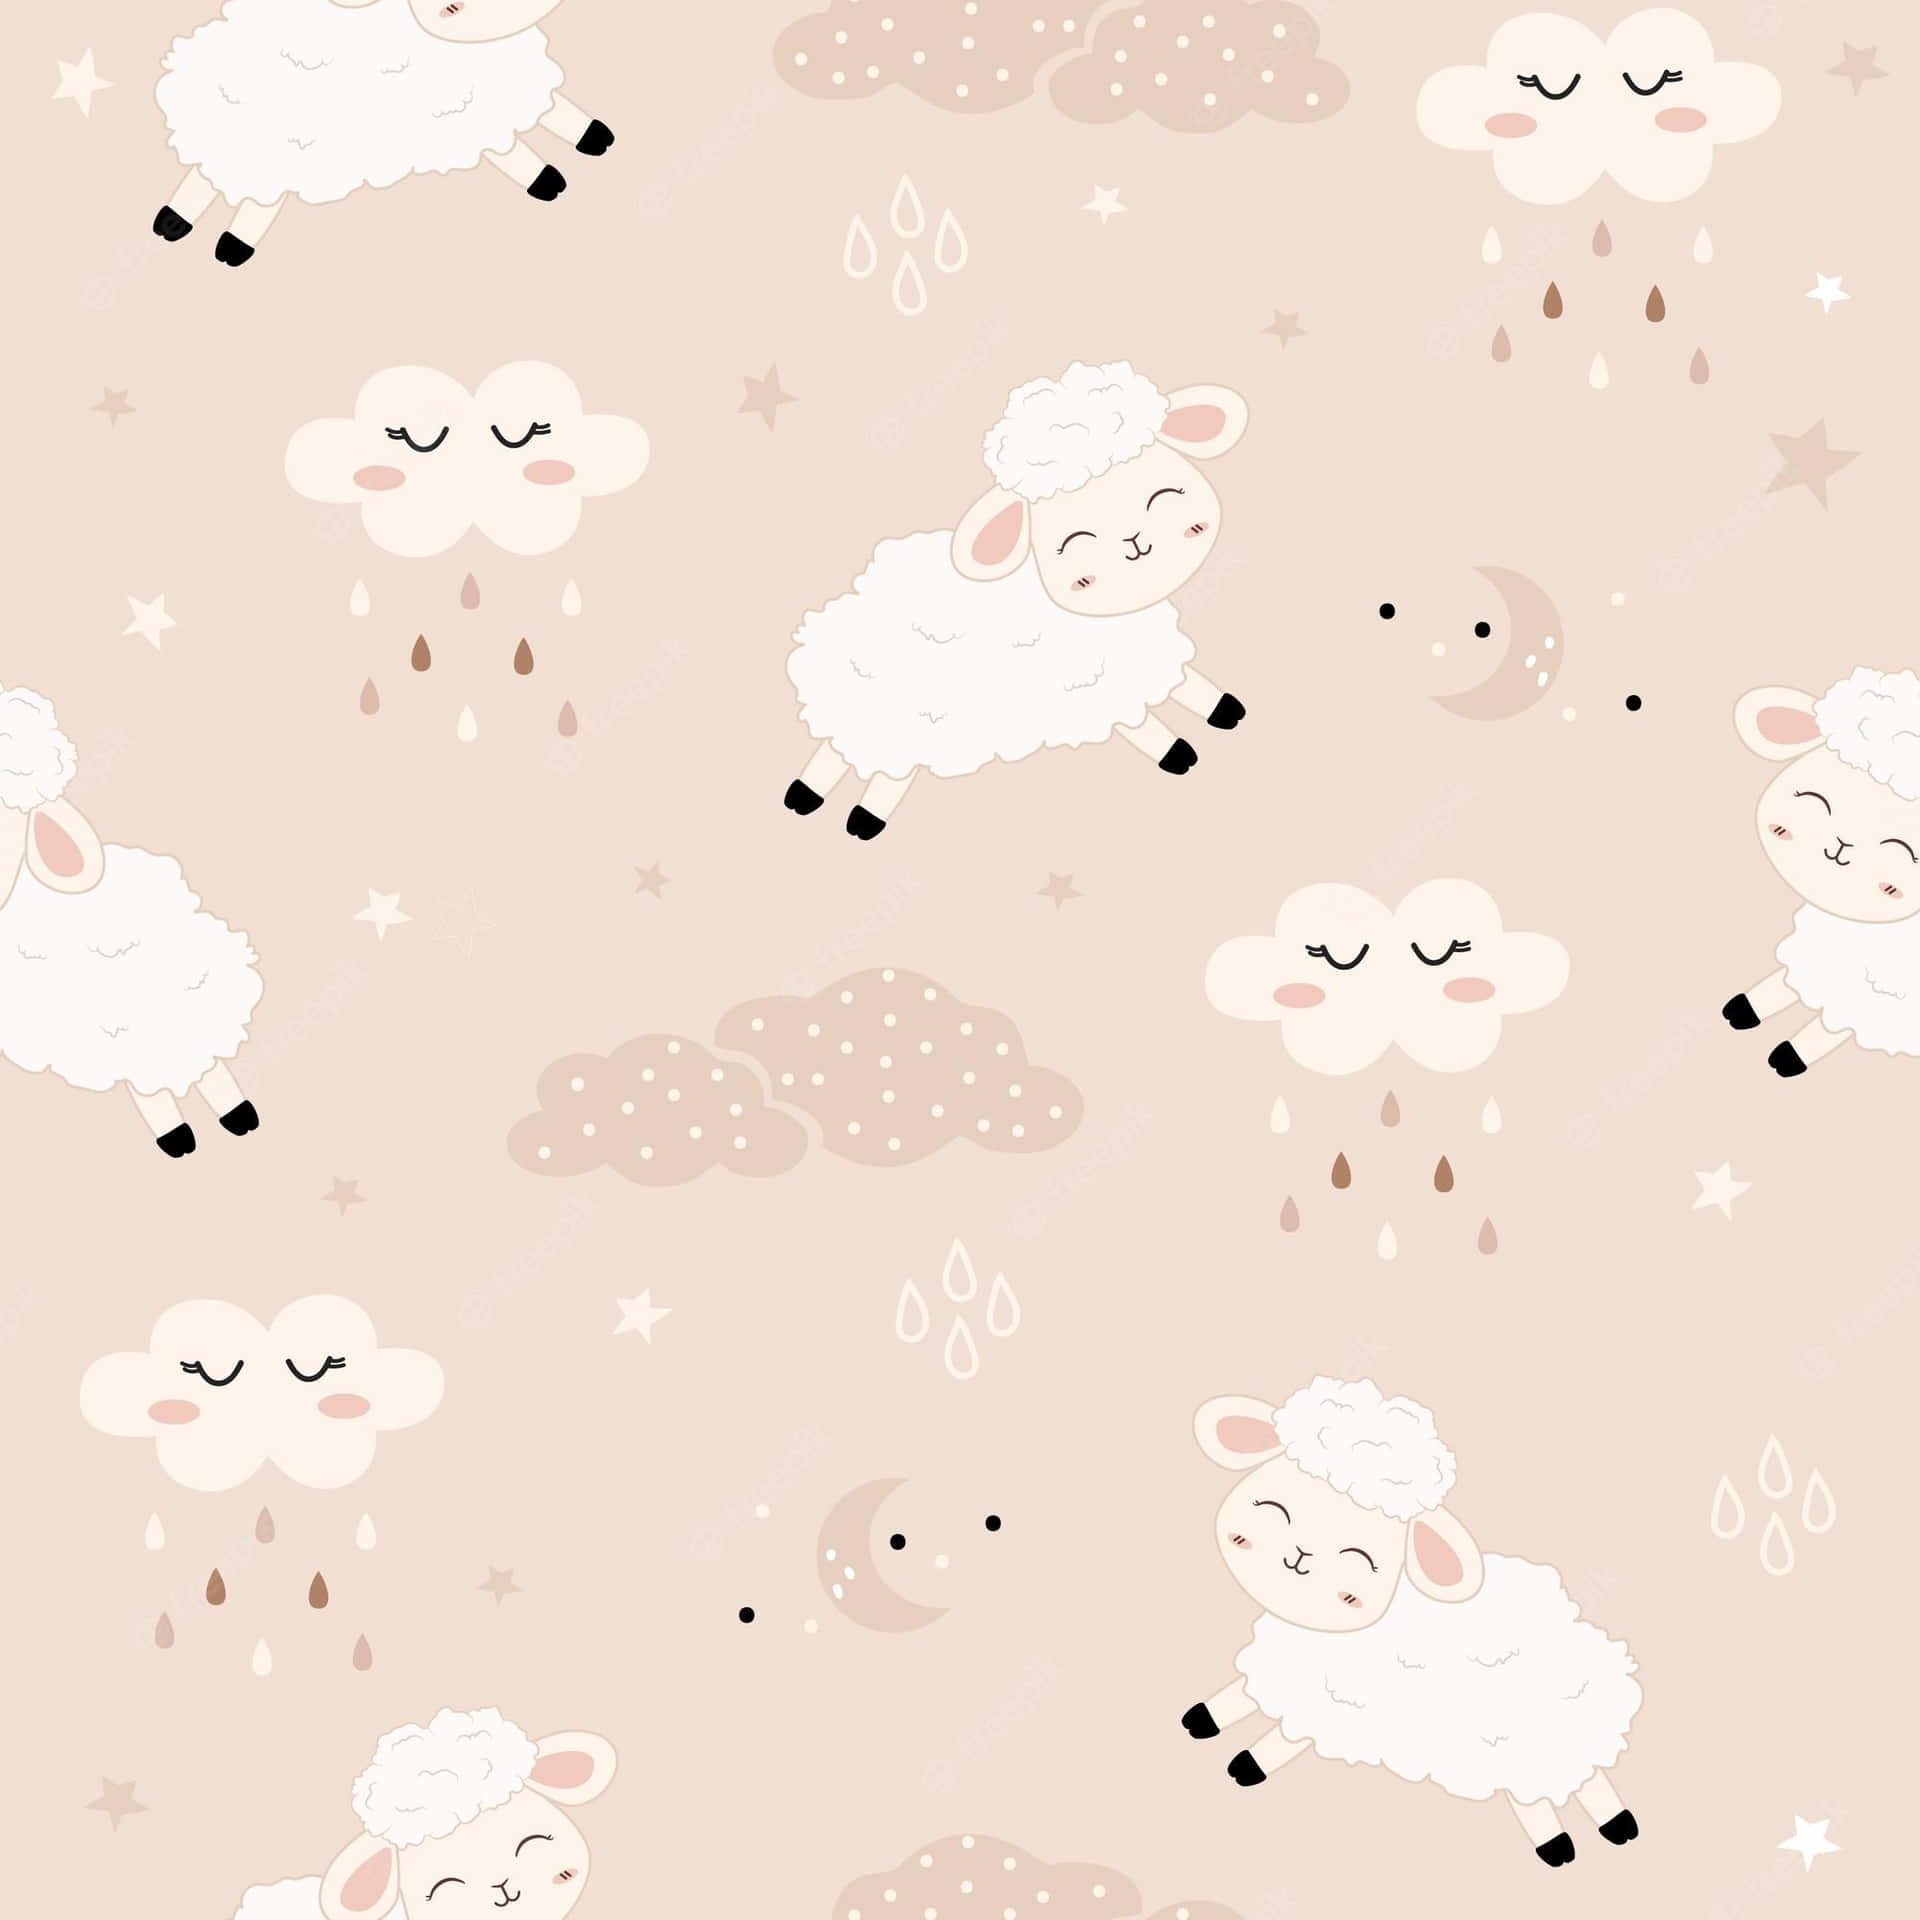 Kawaii Cute Clouds And Sheep Picture